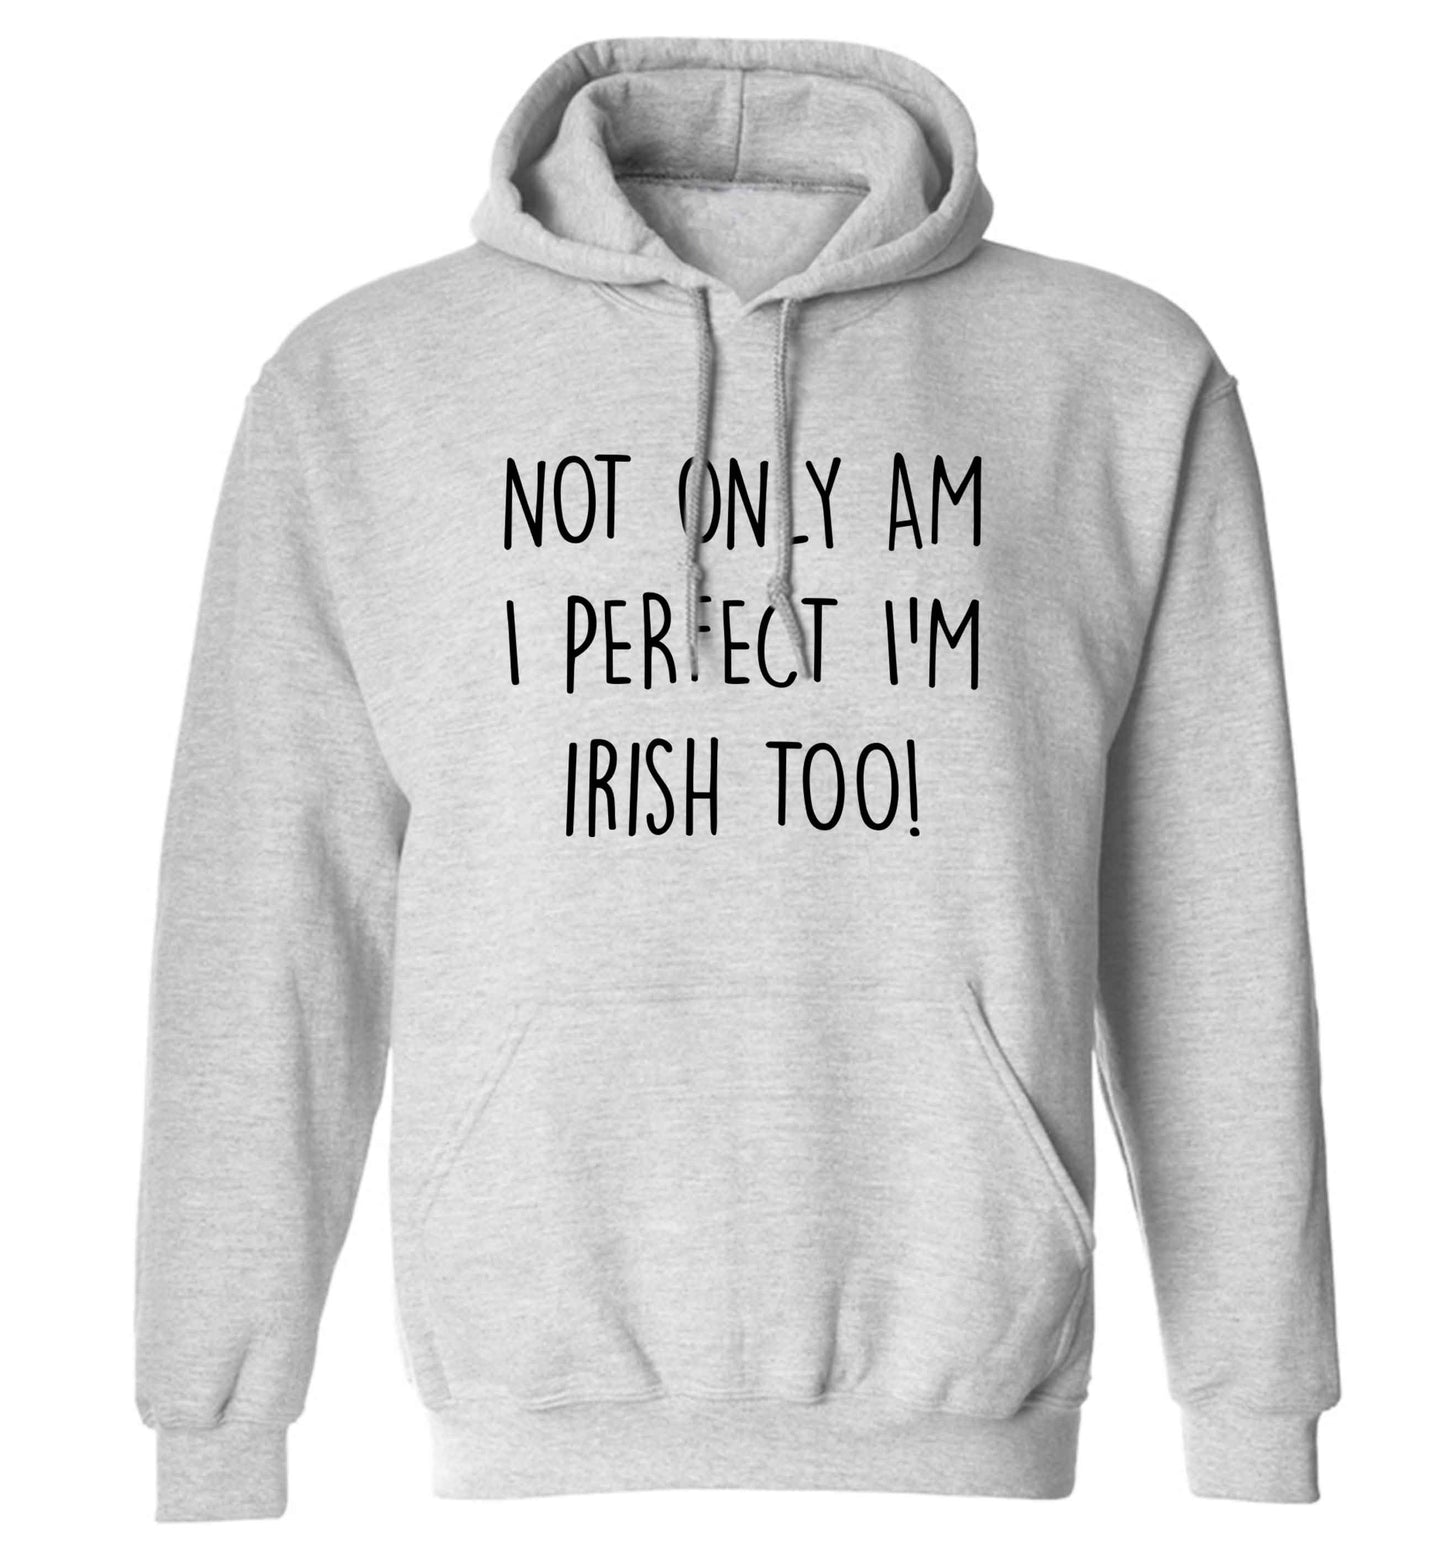 Not only am I perfect I'm Irish too! adults unisex grey hoodie 2XL